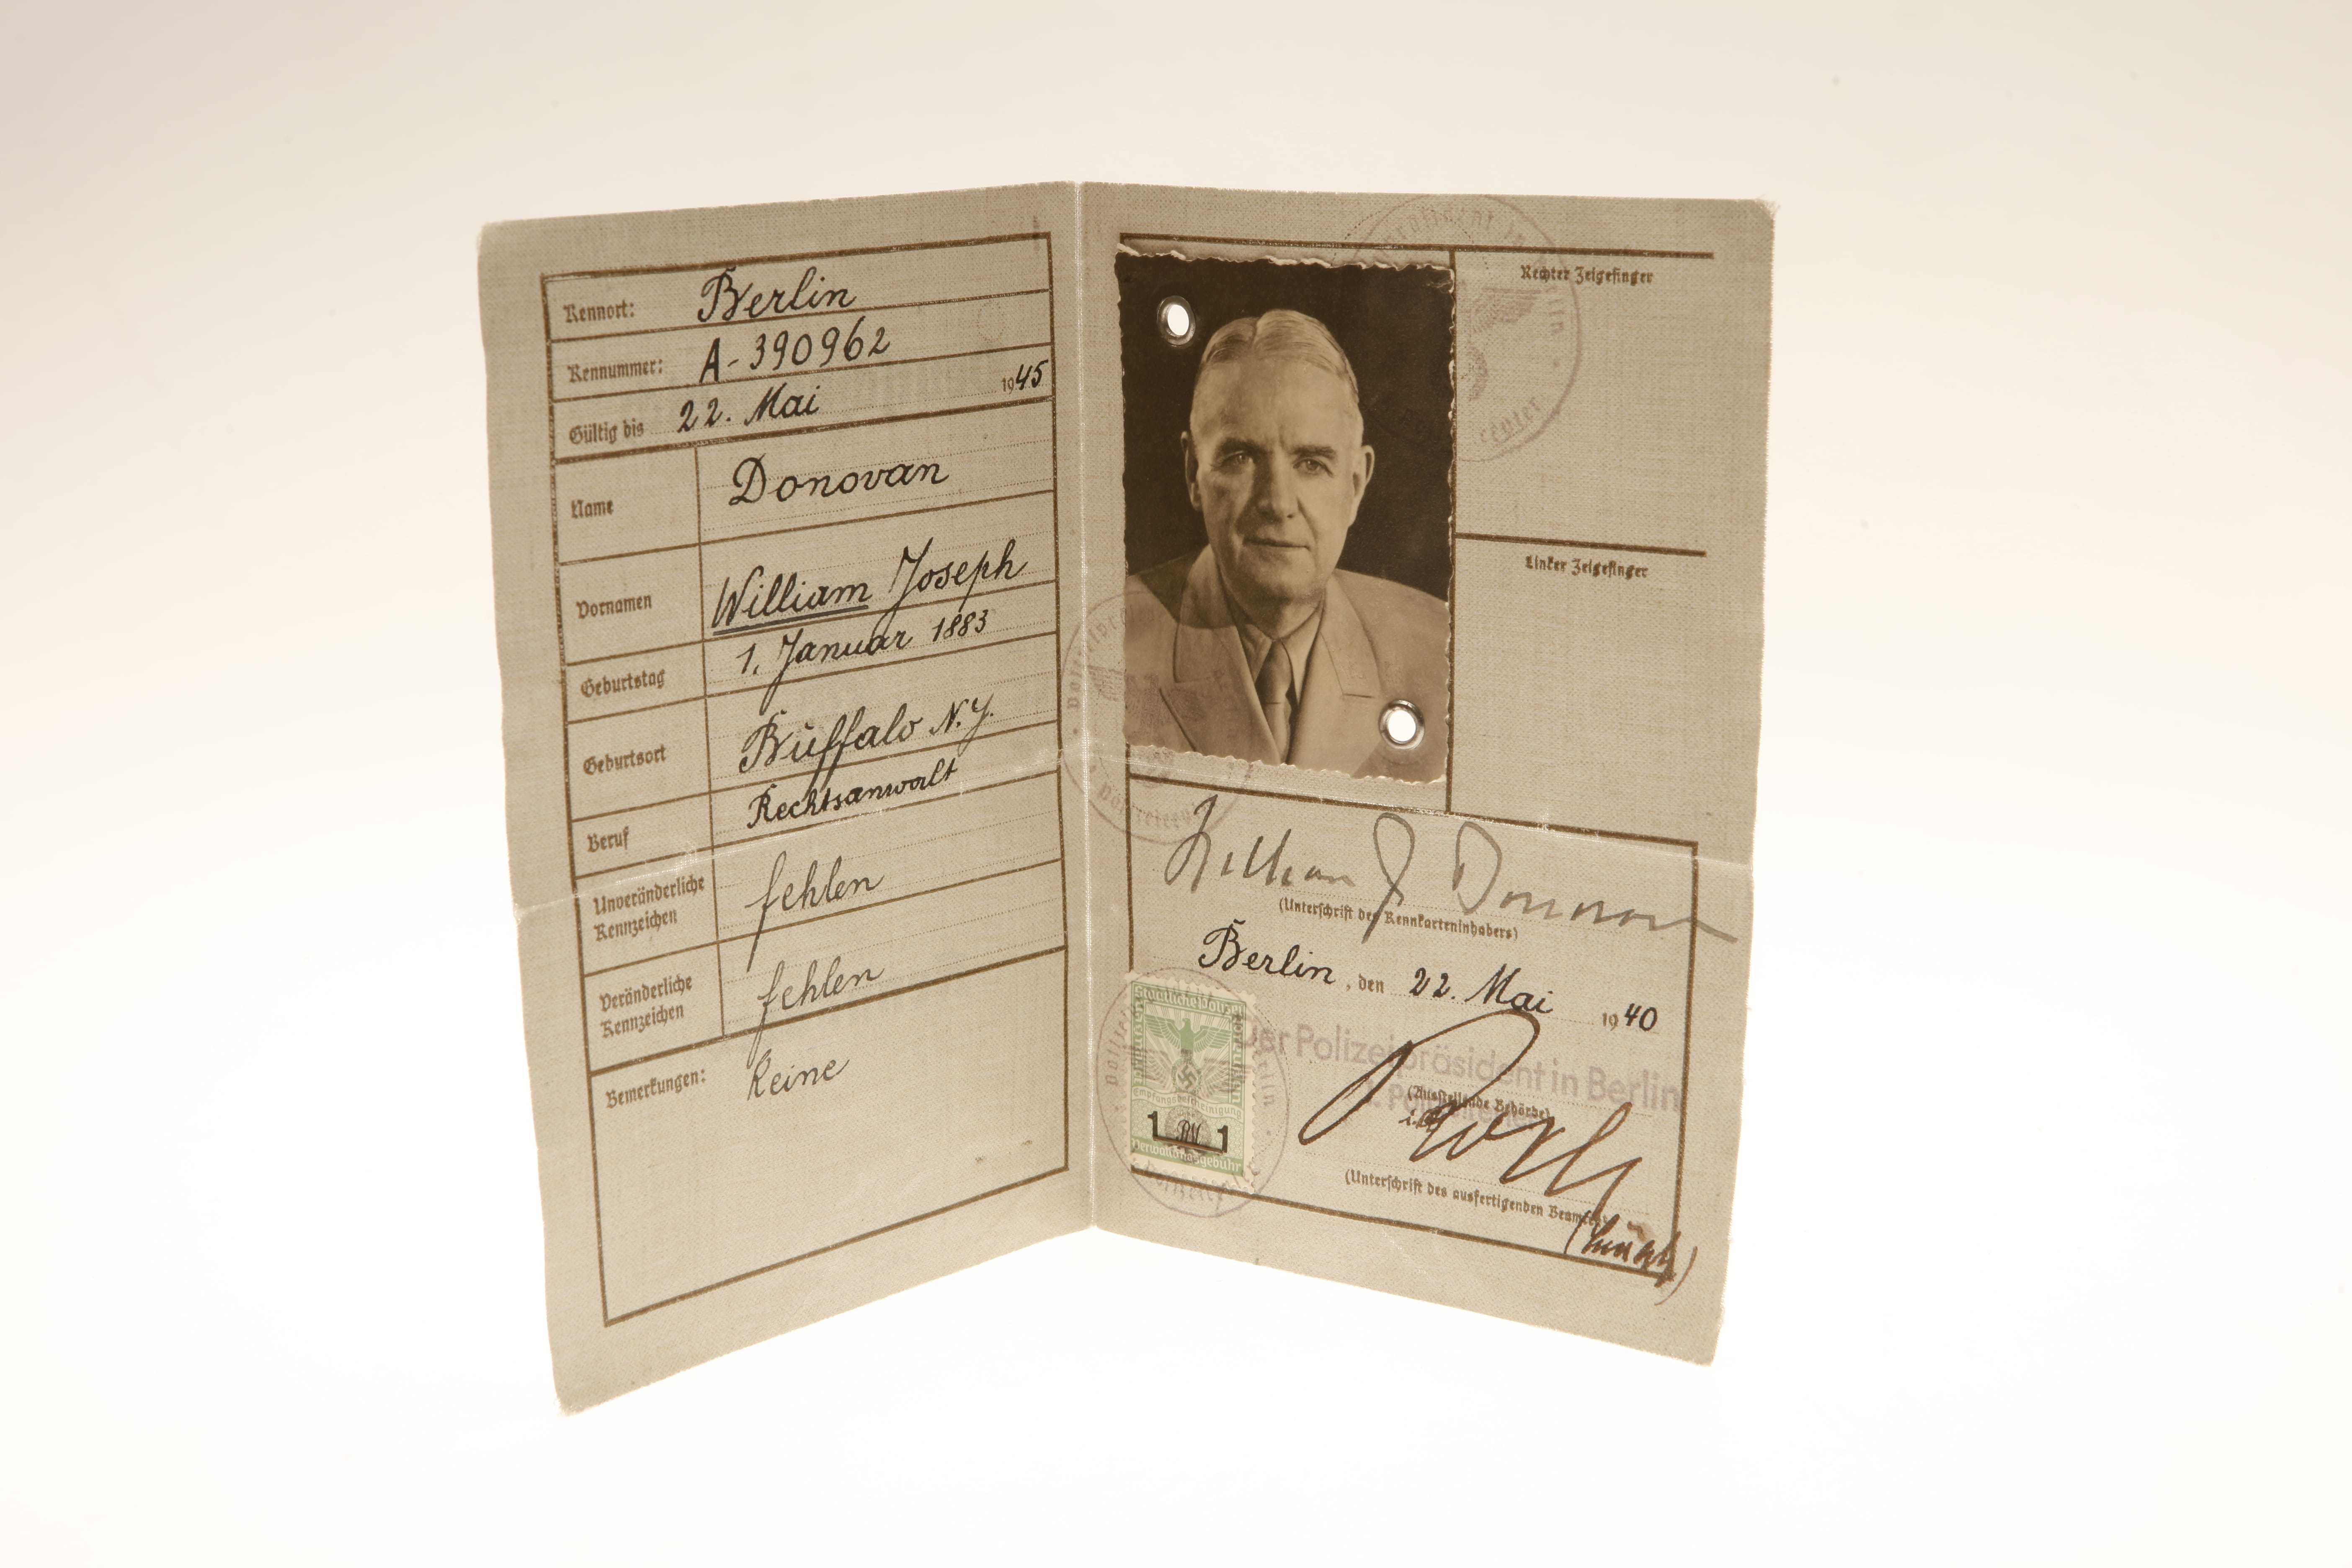 A German ID booklet with the personal details of William J Donovan, his picture, and his signature